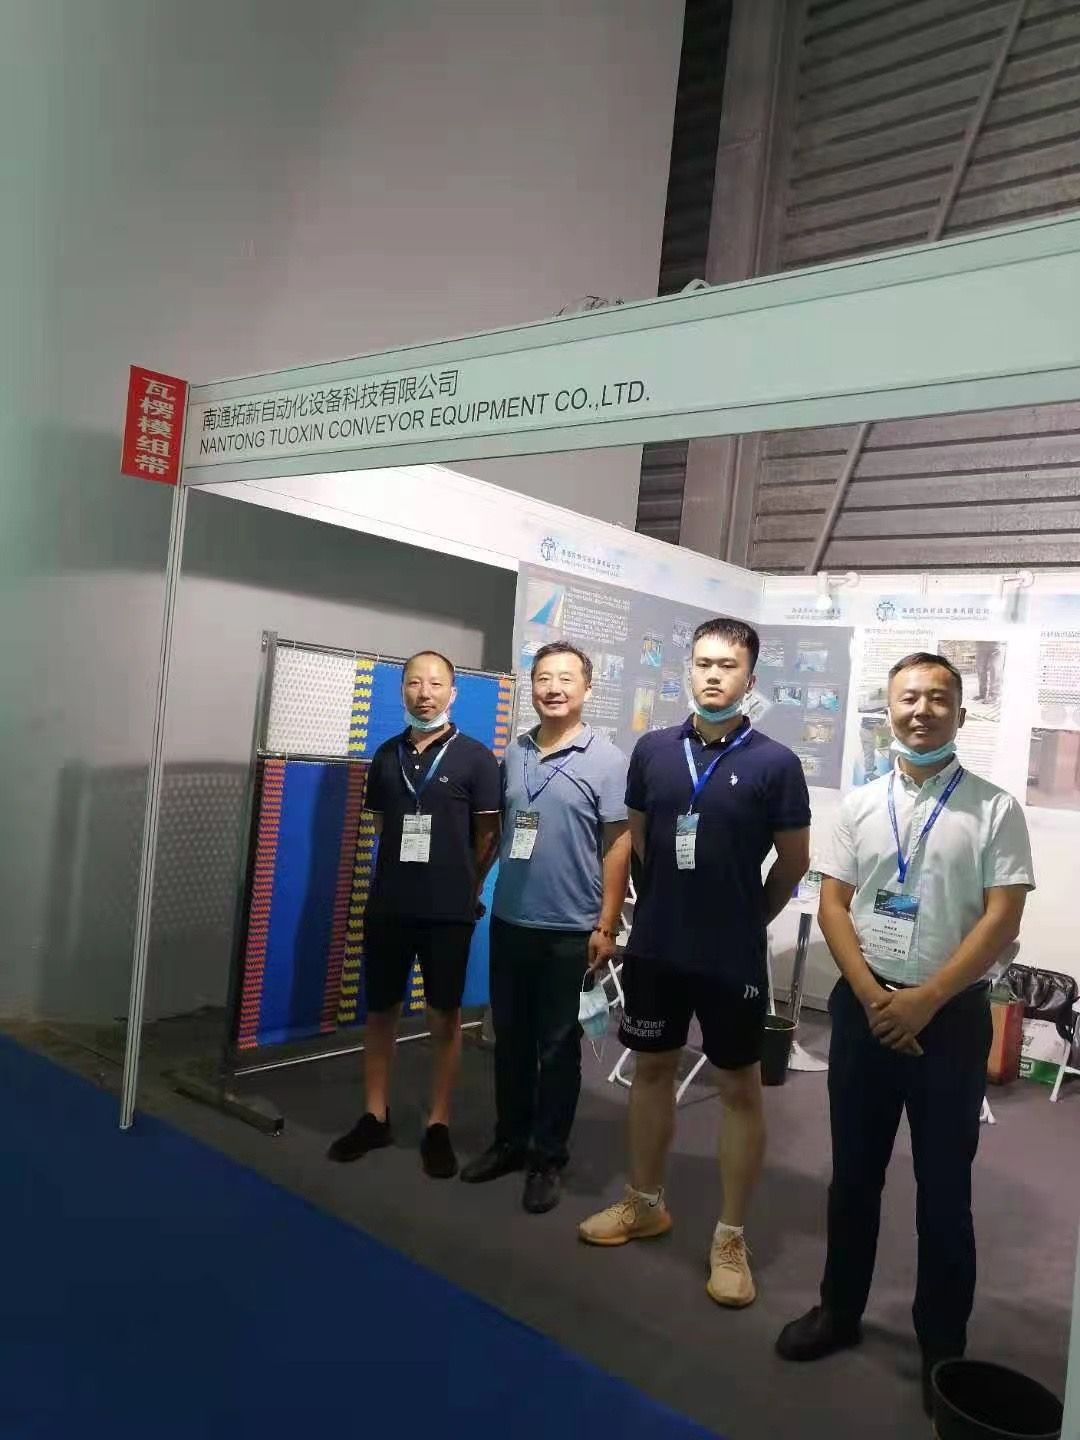 Shanghai corrugated exhibition in July 2021 (2)